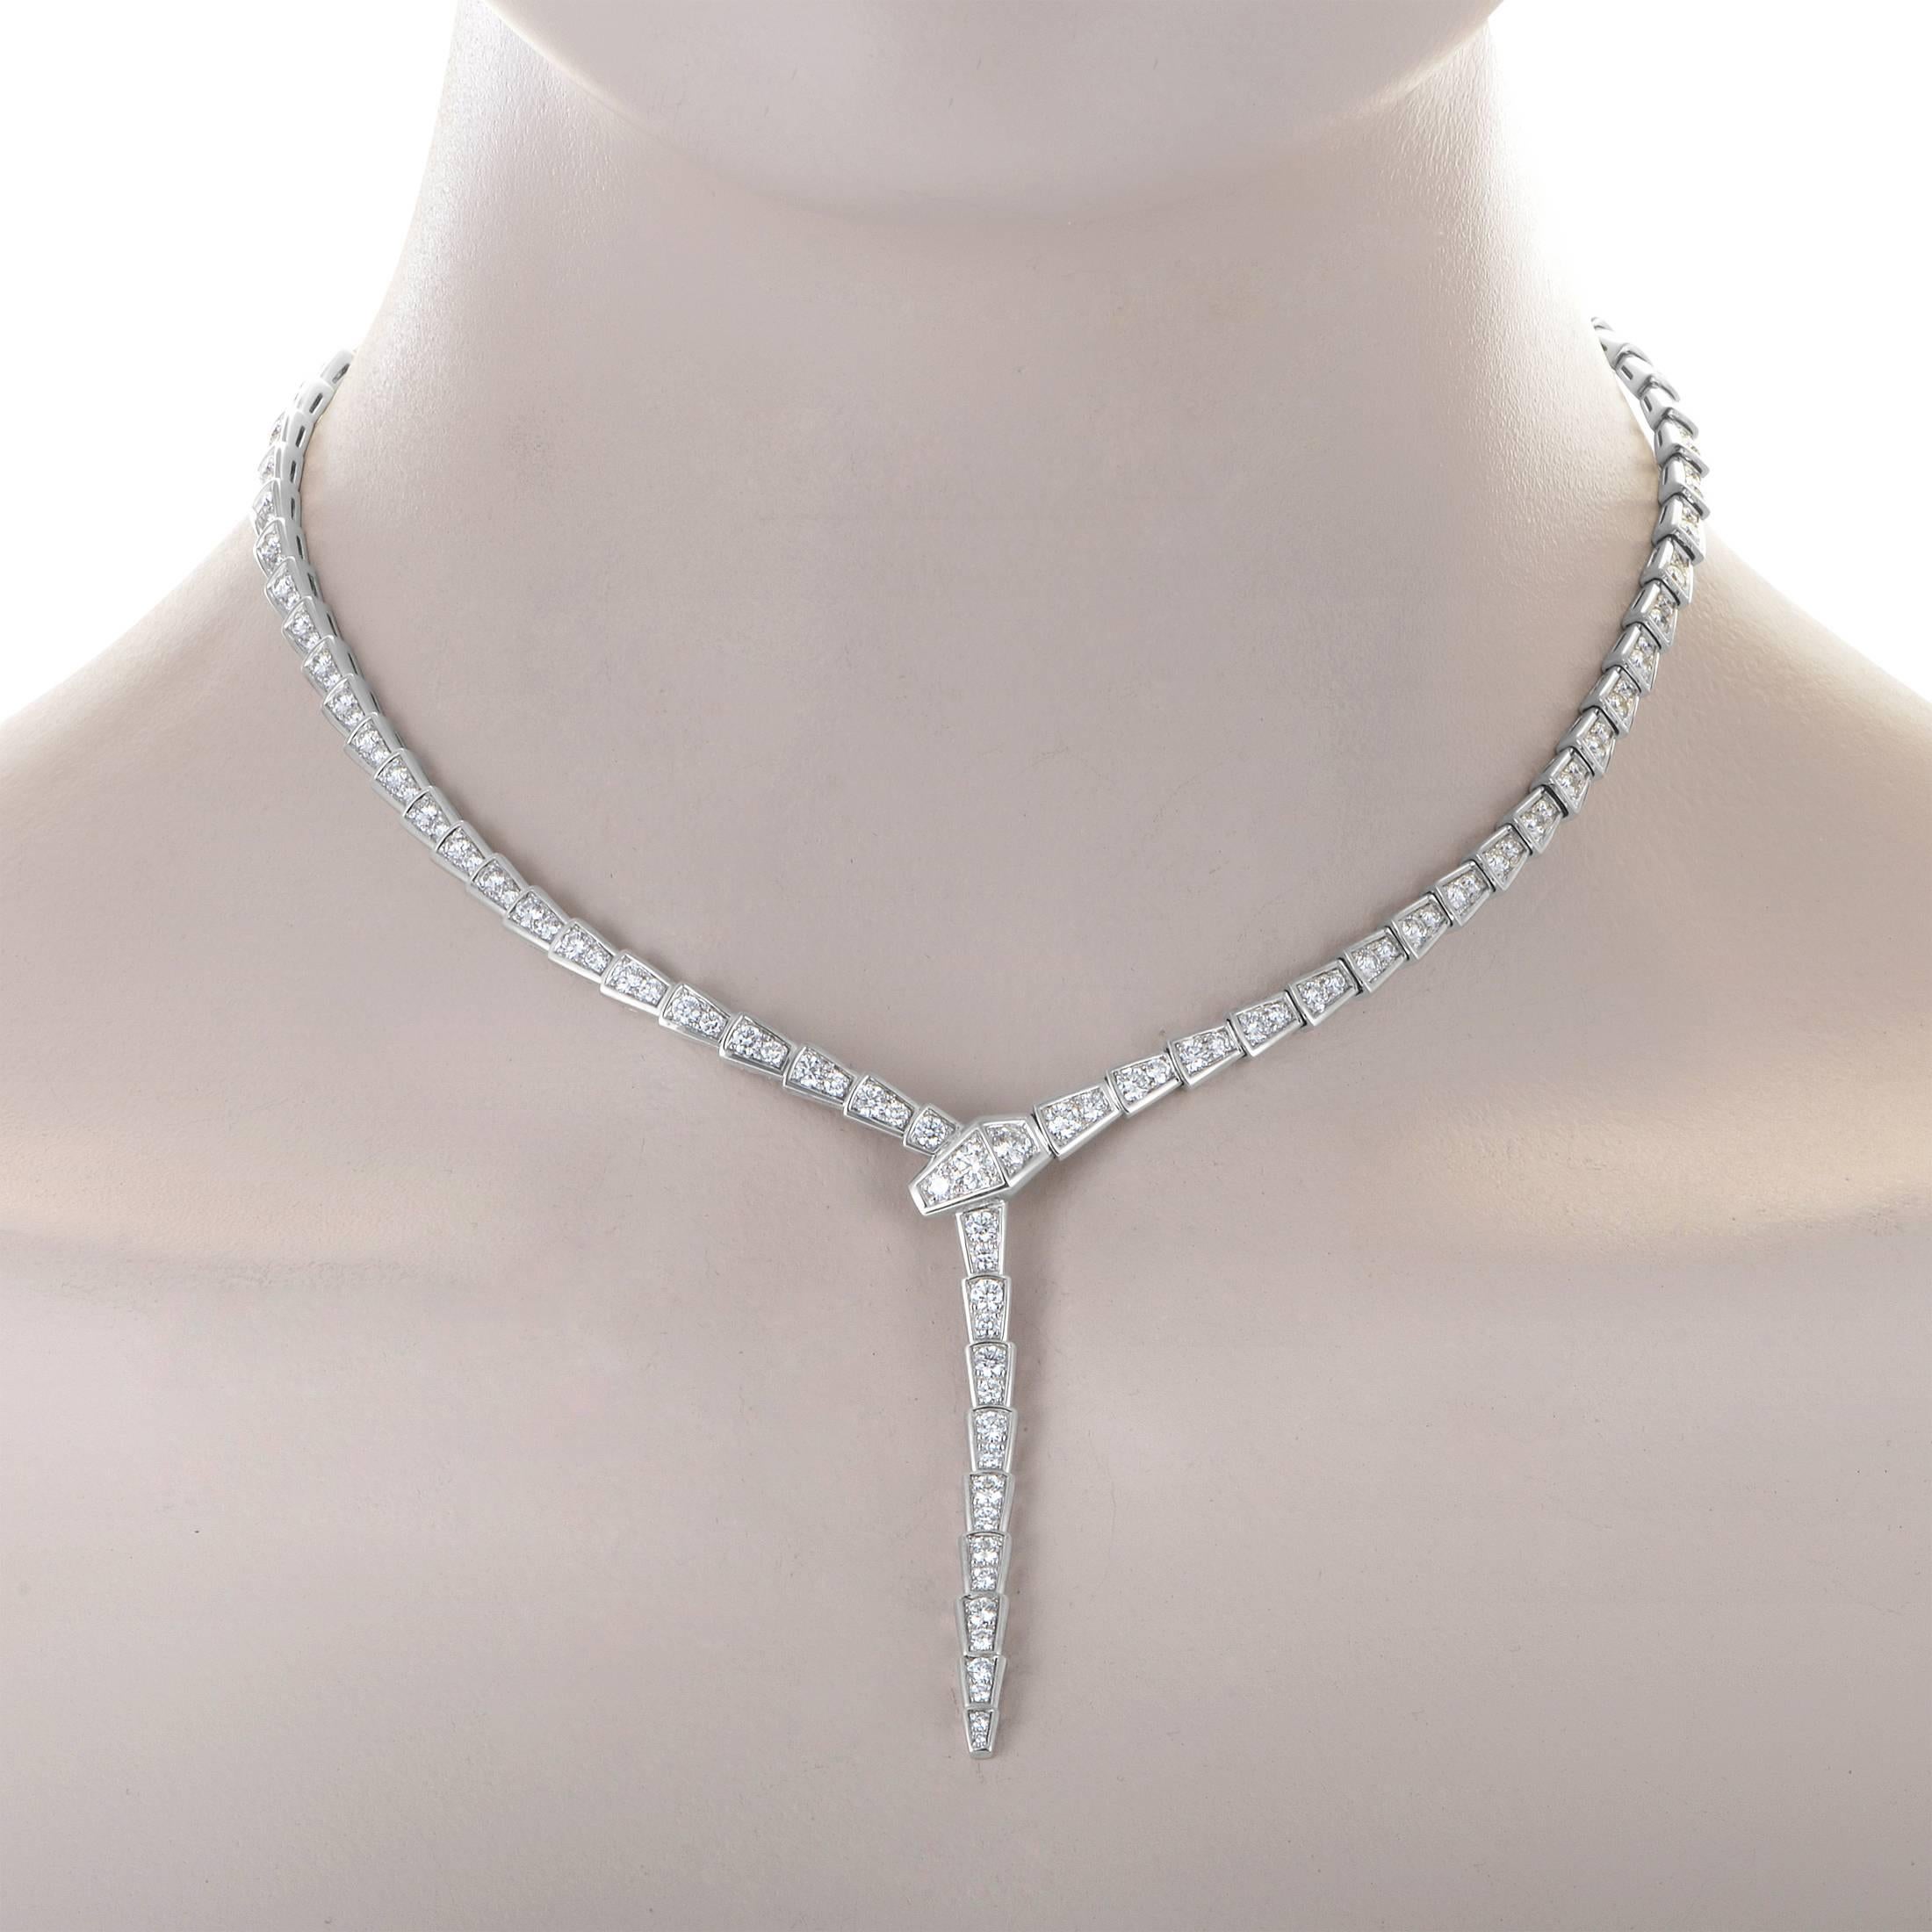 This piece from Bvlgari's Serpenti collection is made of 18K White Gold and had a full diamond pave. The brillant white diamonds weigh 8.50 carats.
Included Items: Manufacturer's Box and Papers